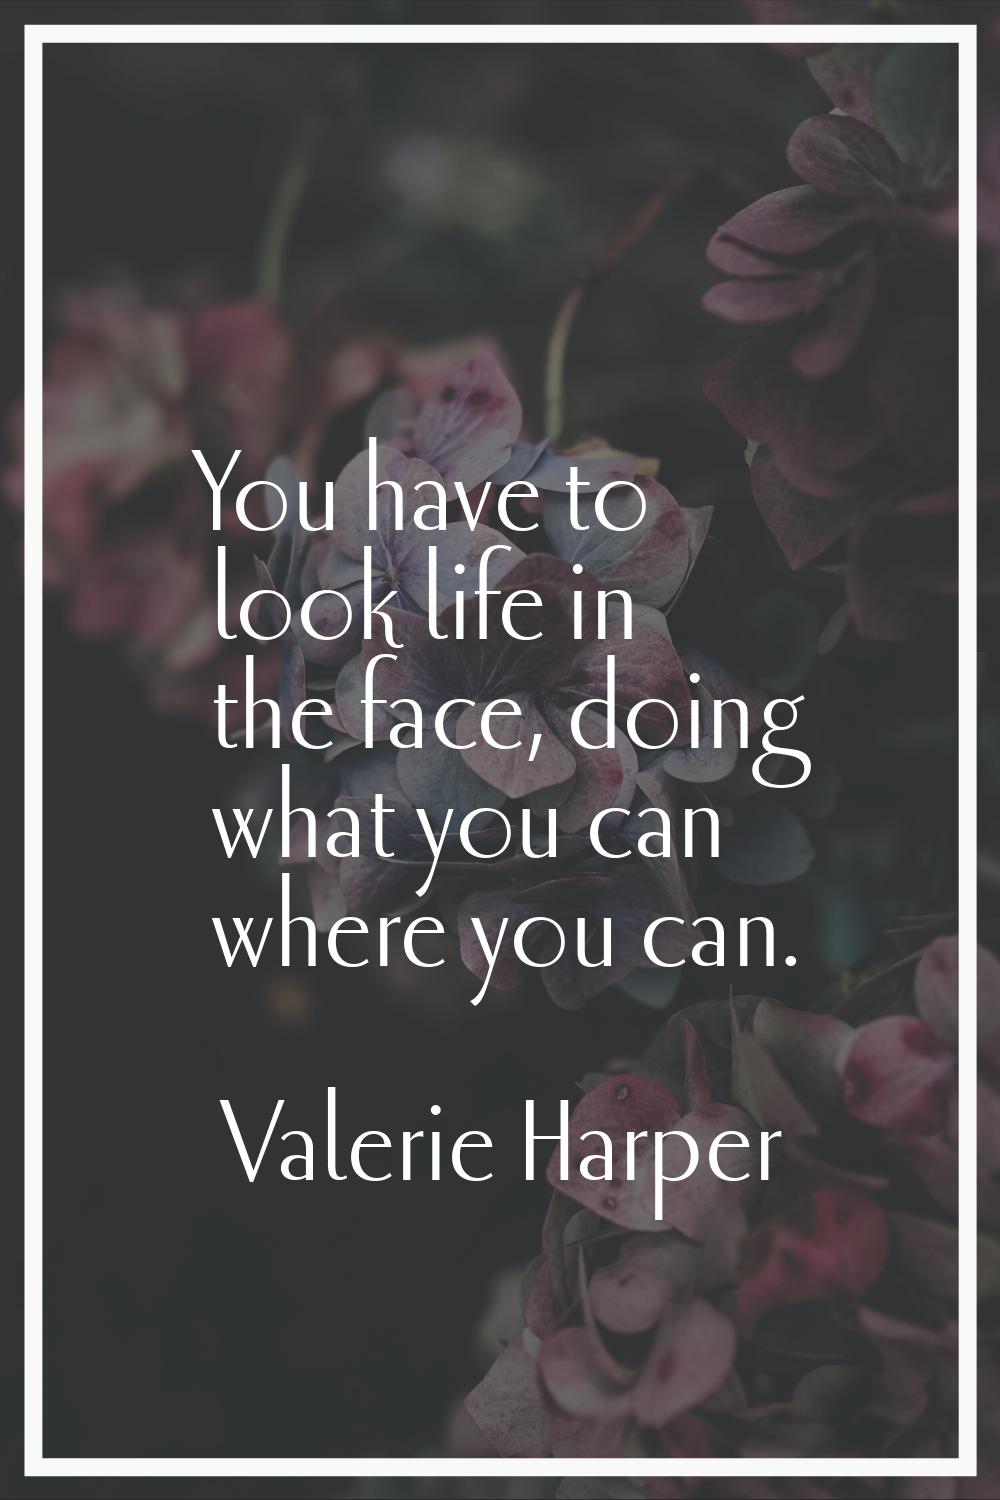 You have to look life in the face, doing what you can where you can.